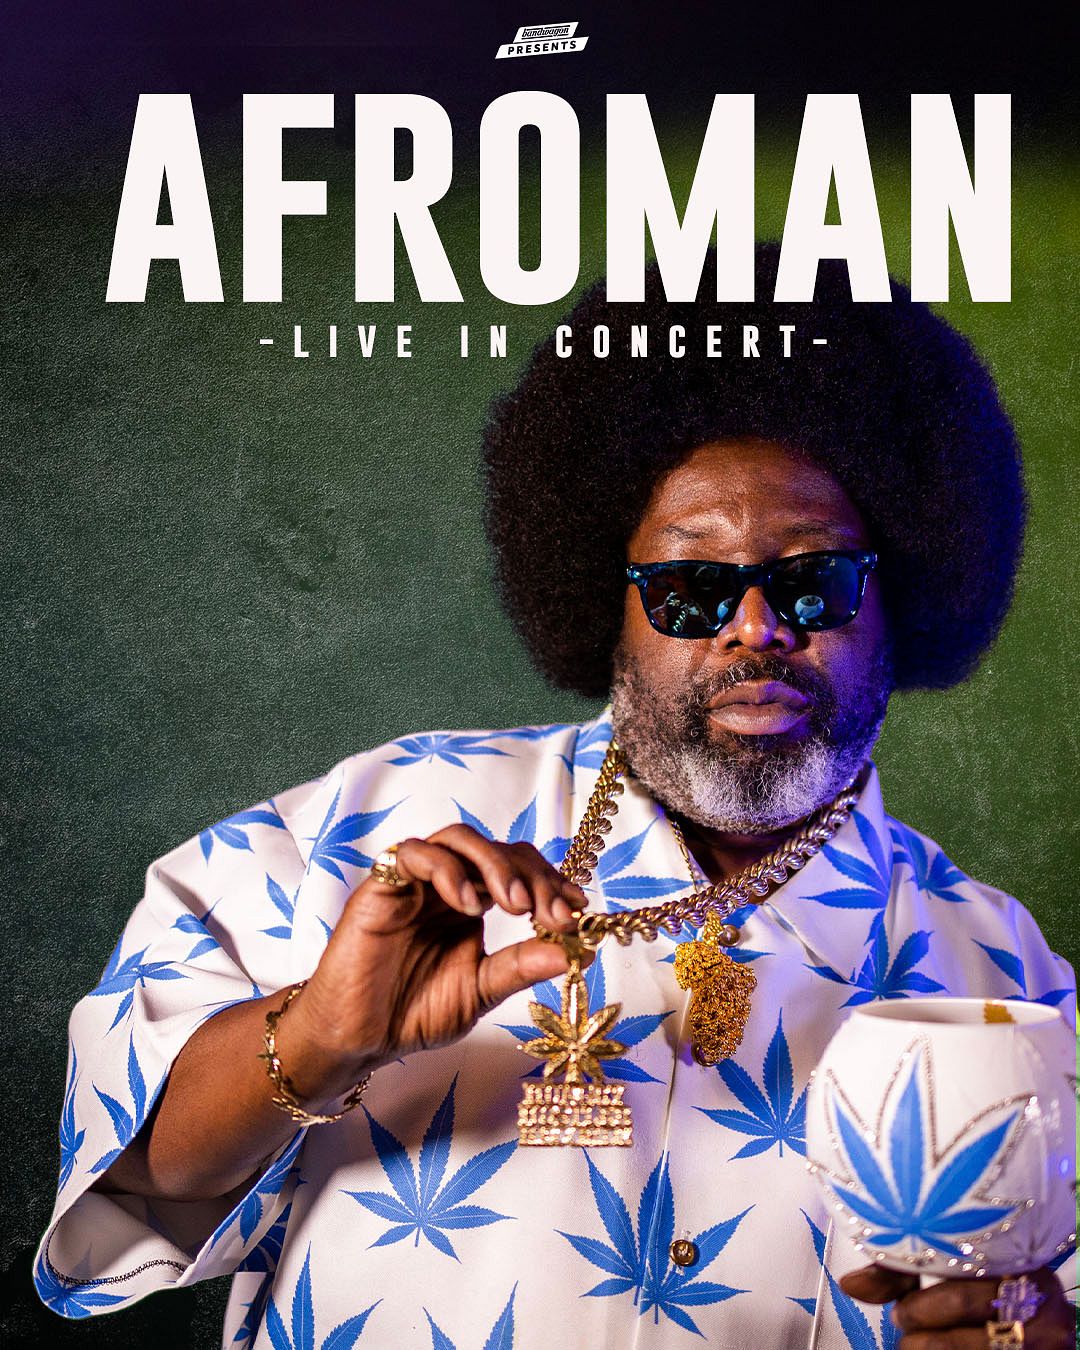 Afroman - Live in Concert (Denver, CO) Tickets at The Black Buzzard at ...